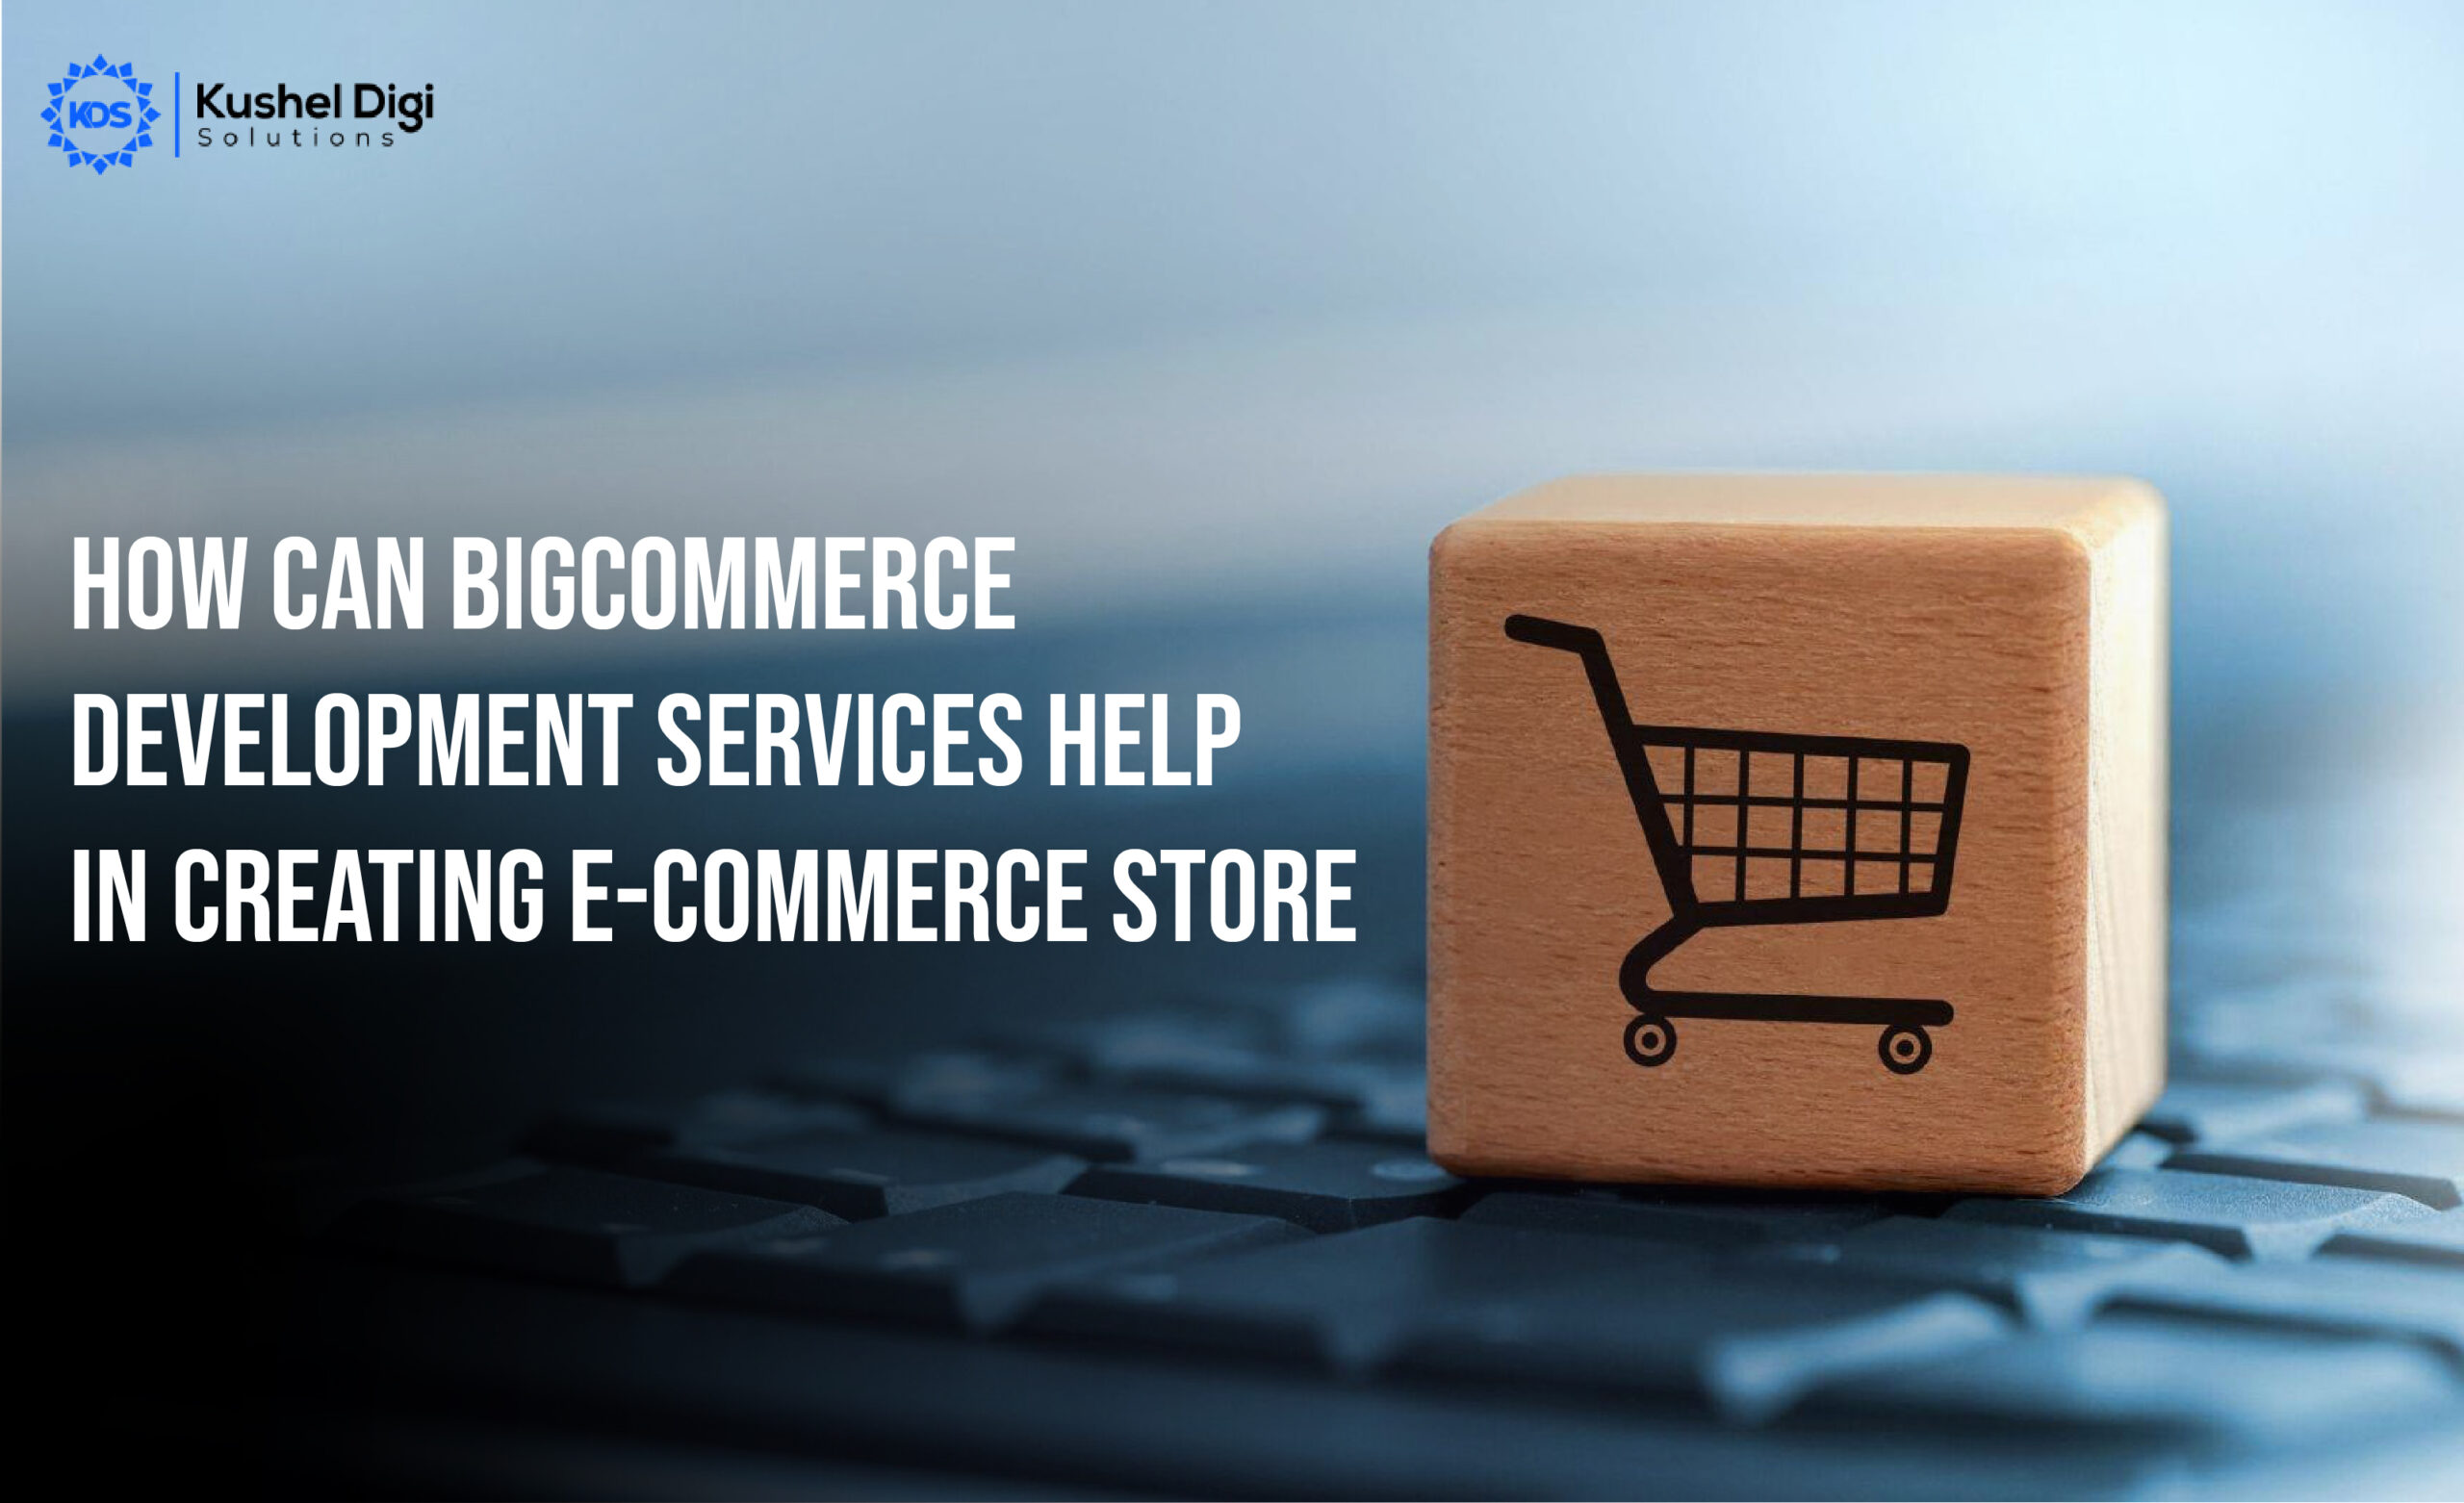 How can Bigcommerce development services help in creating a mobile-responsive e-commerce store?